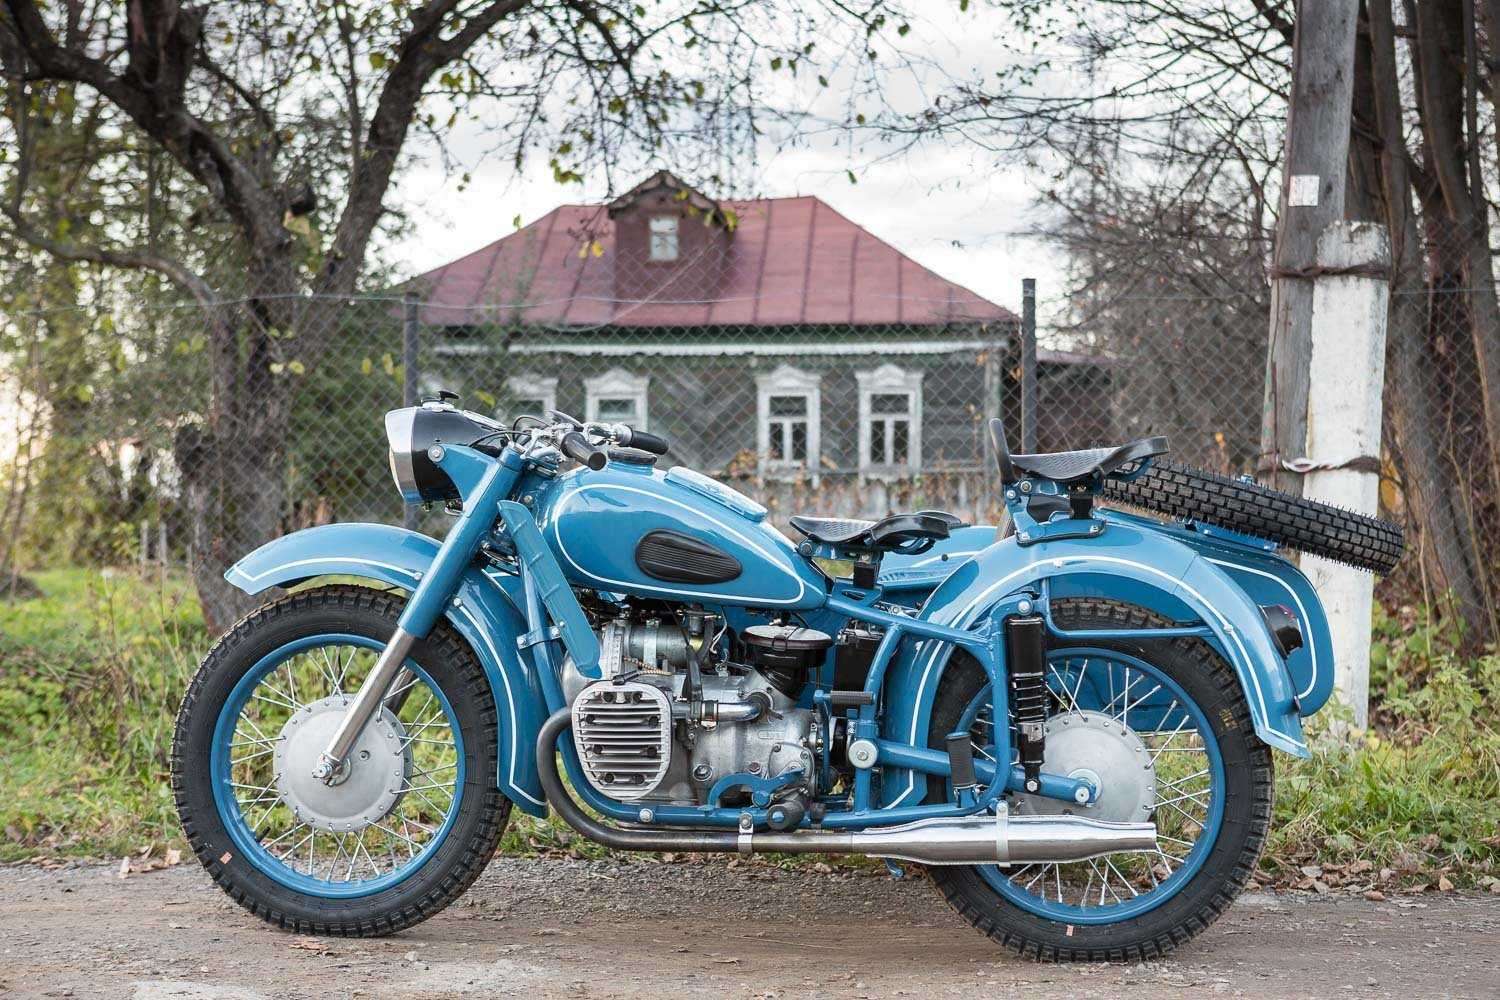 motorcycle K-750 "Irbit" puzzle online from photo